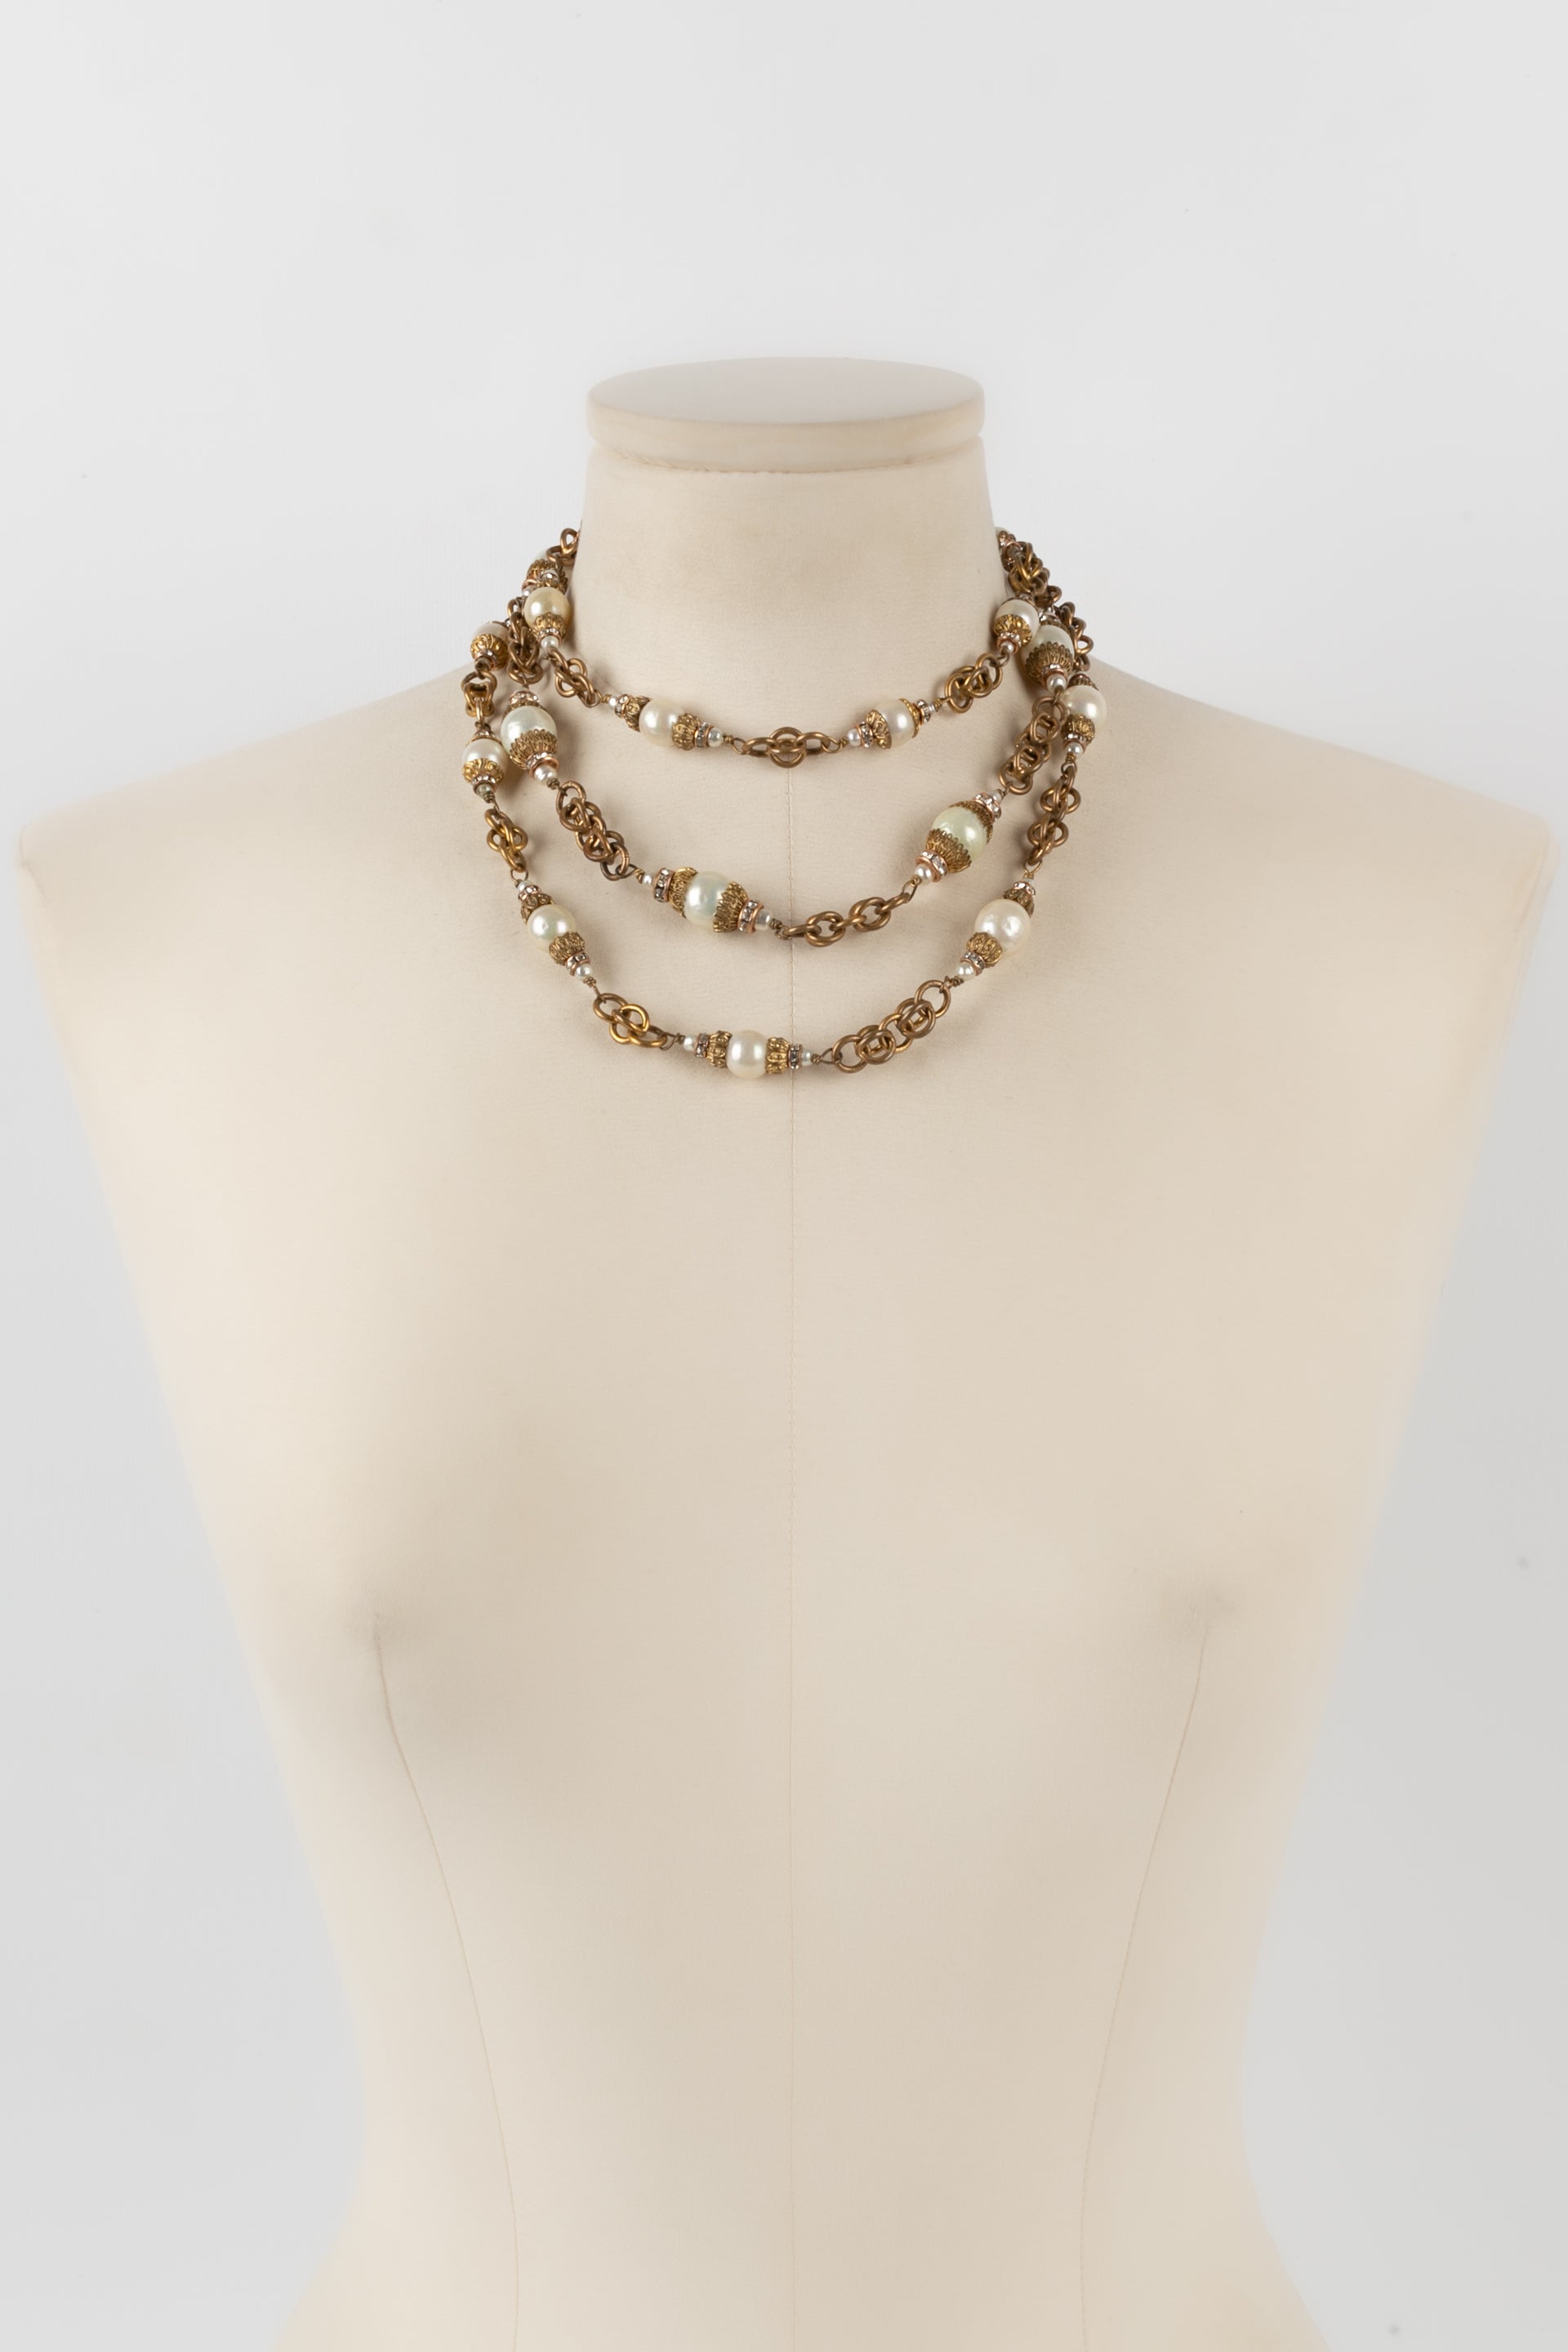 EARLY VINTAGE CHANEL PEARL NECKLACE & GRIPOIX POURED GLASS FLOWER PEND –  Connie DeNave's Jeweldiva